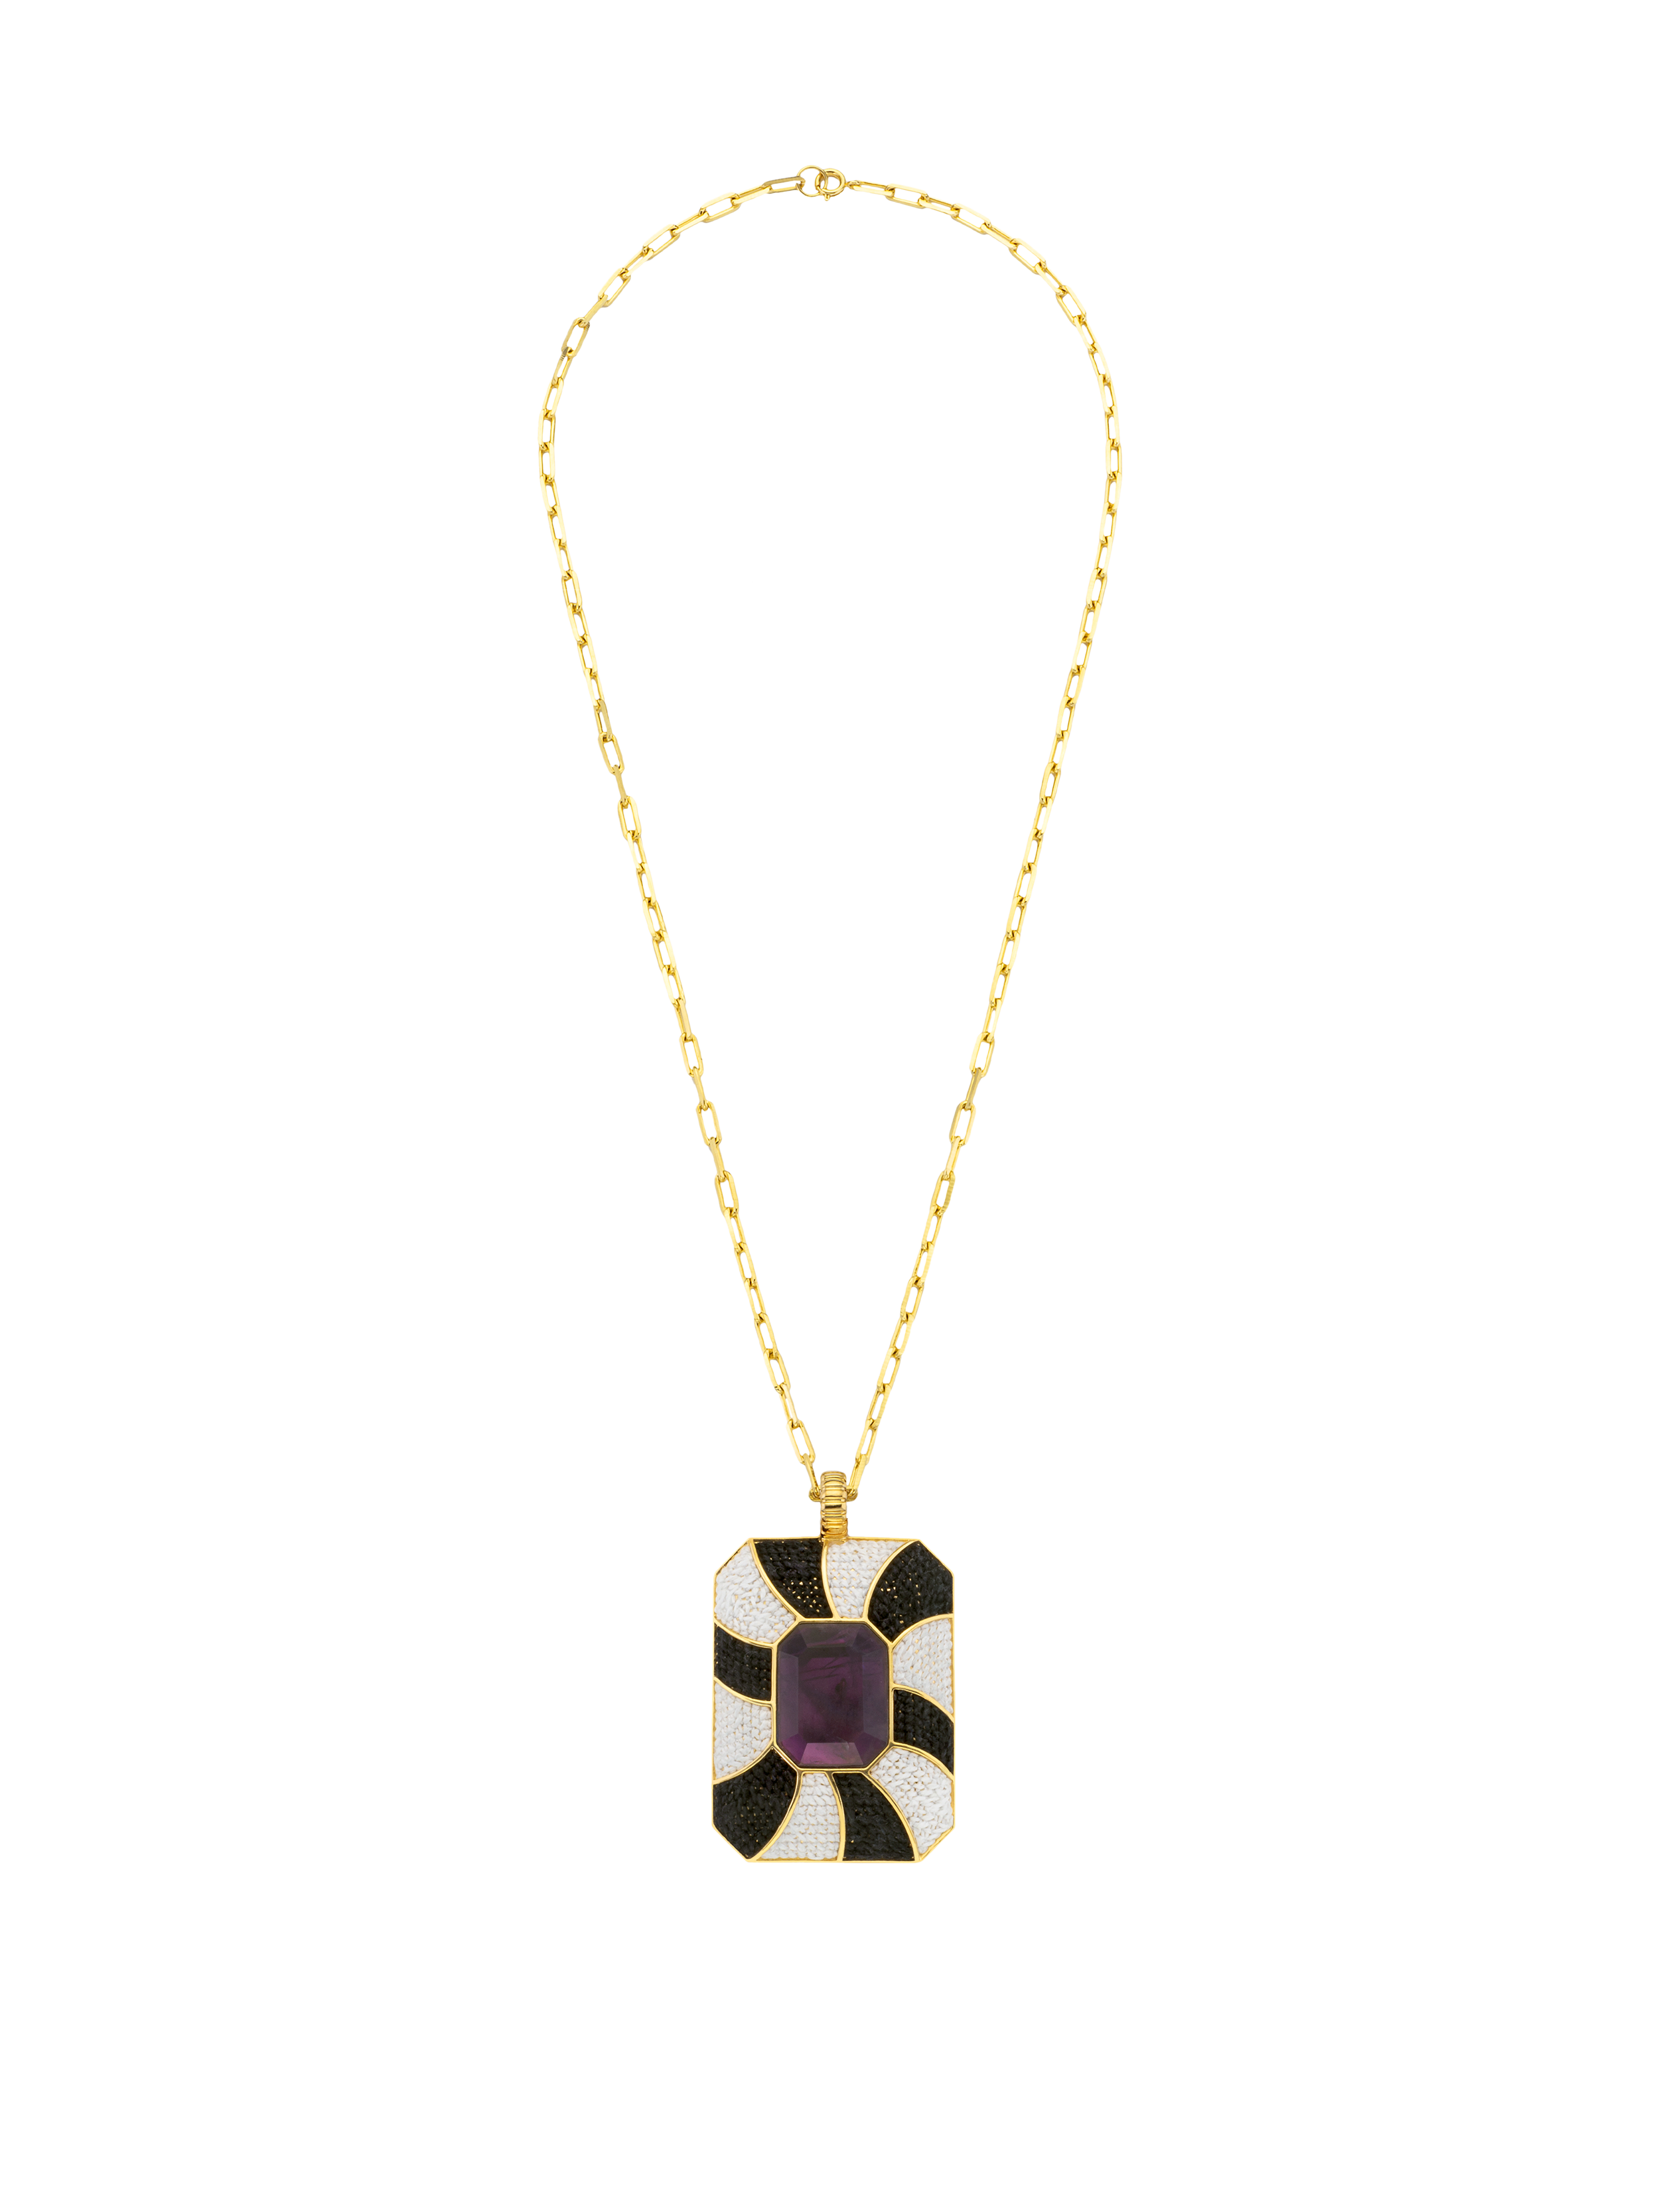 Lolly Necklace - Black and White